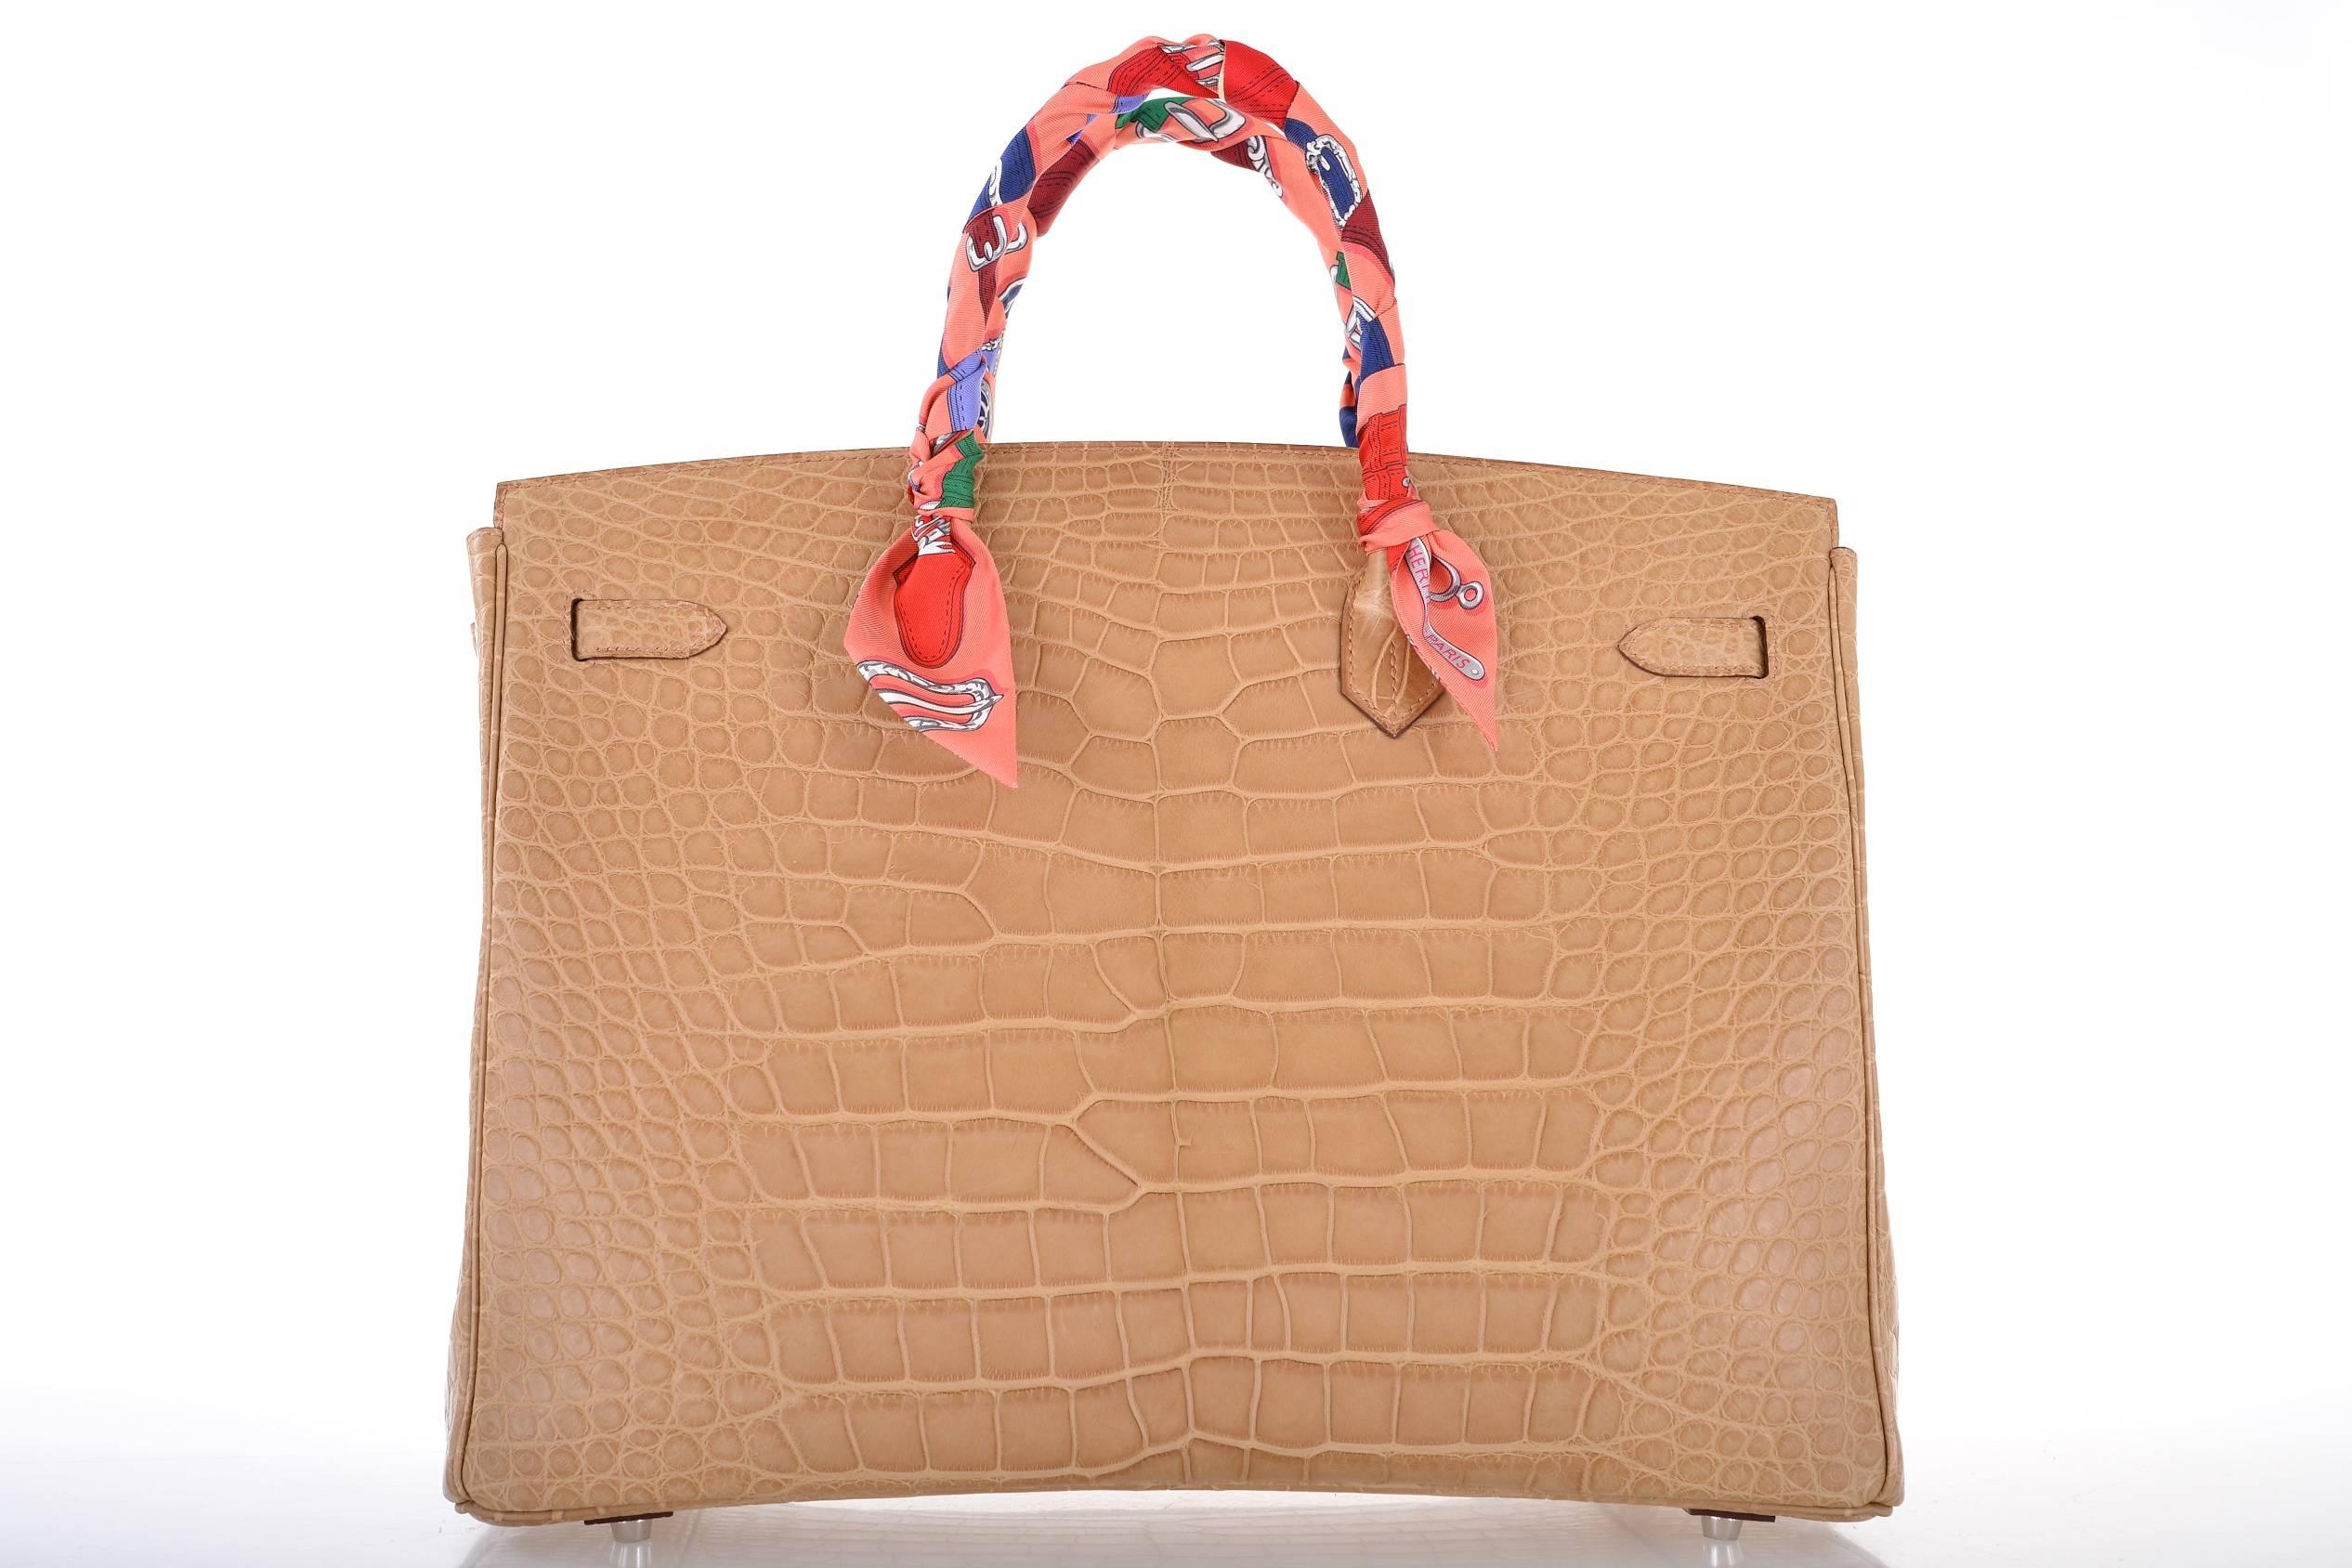 HERMES BIRKIN BAG 40CM POUSSIERE MATTE ALLIGATOR OMG! JaneFinds In New Condition For Sale In NYC Tri-State/Miami, NY